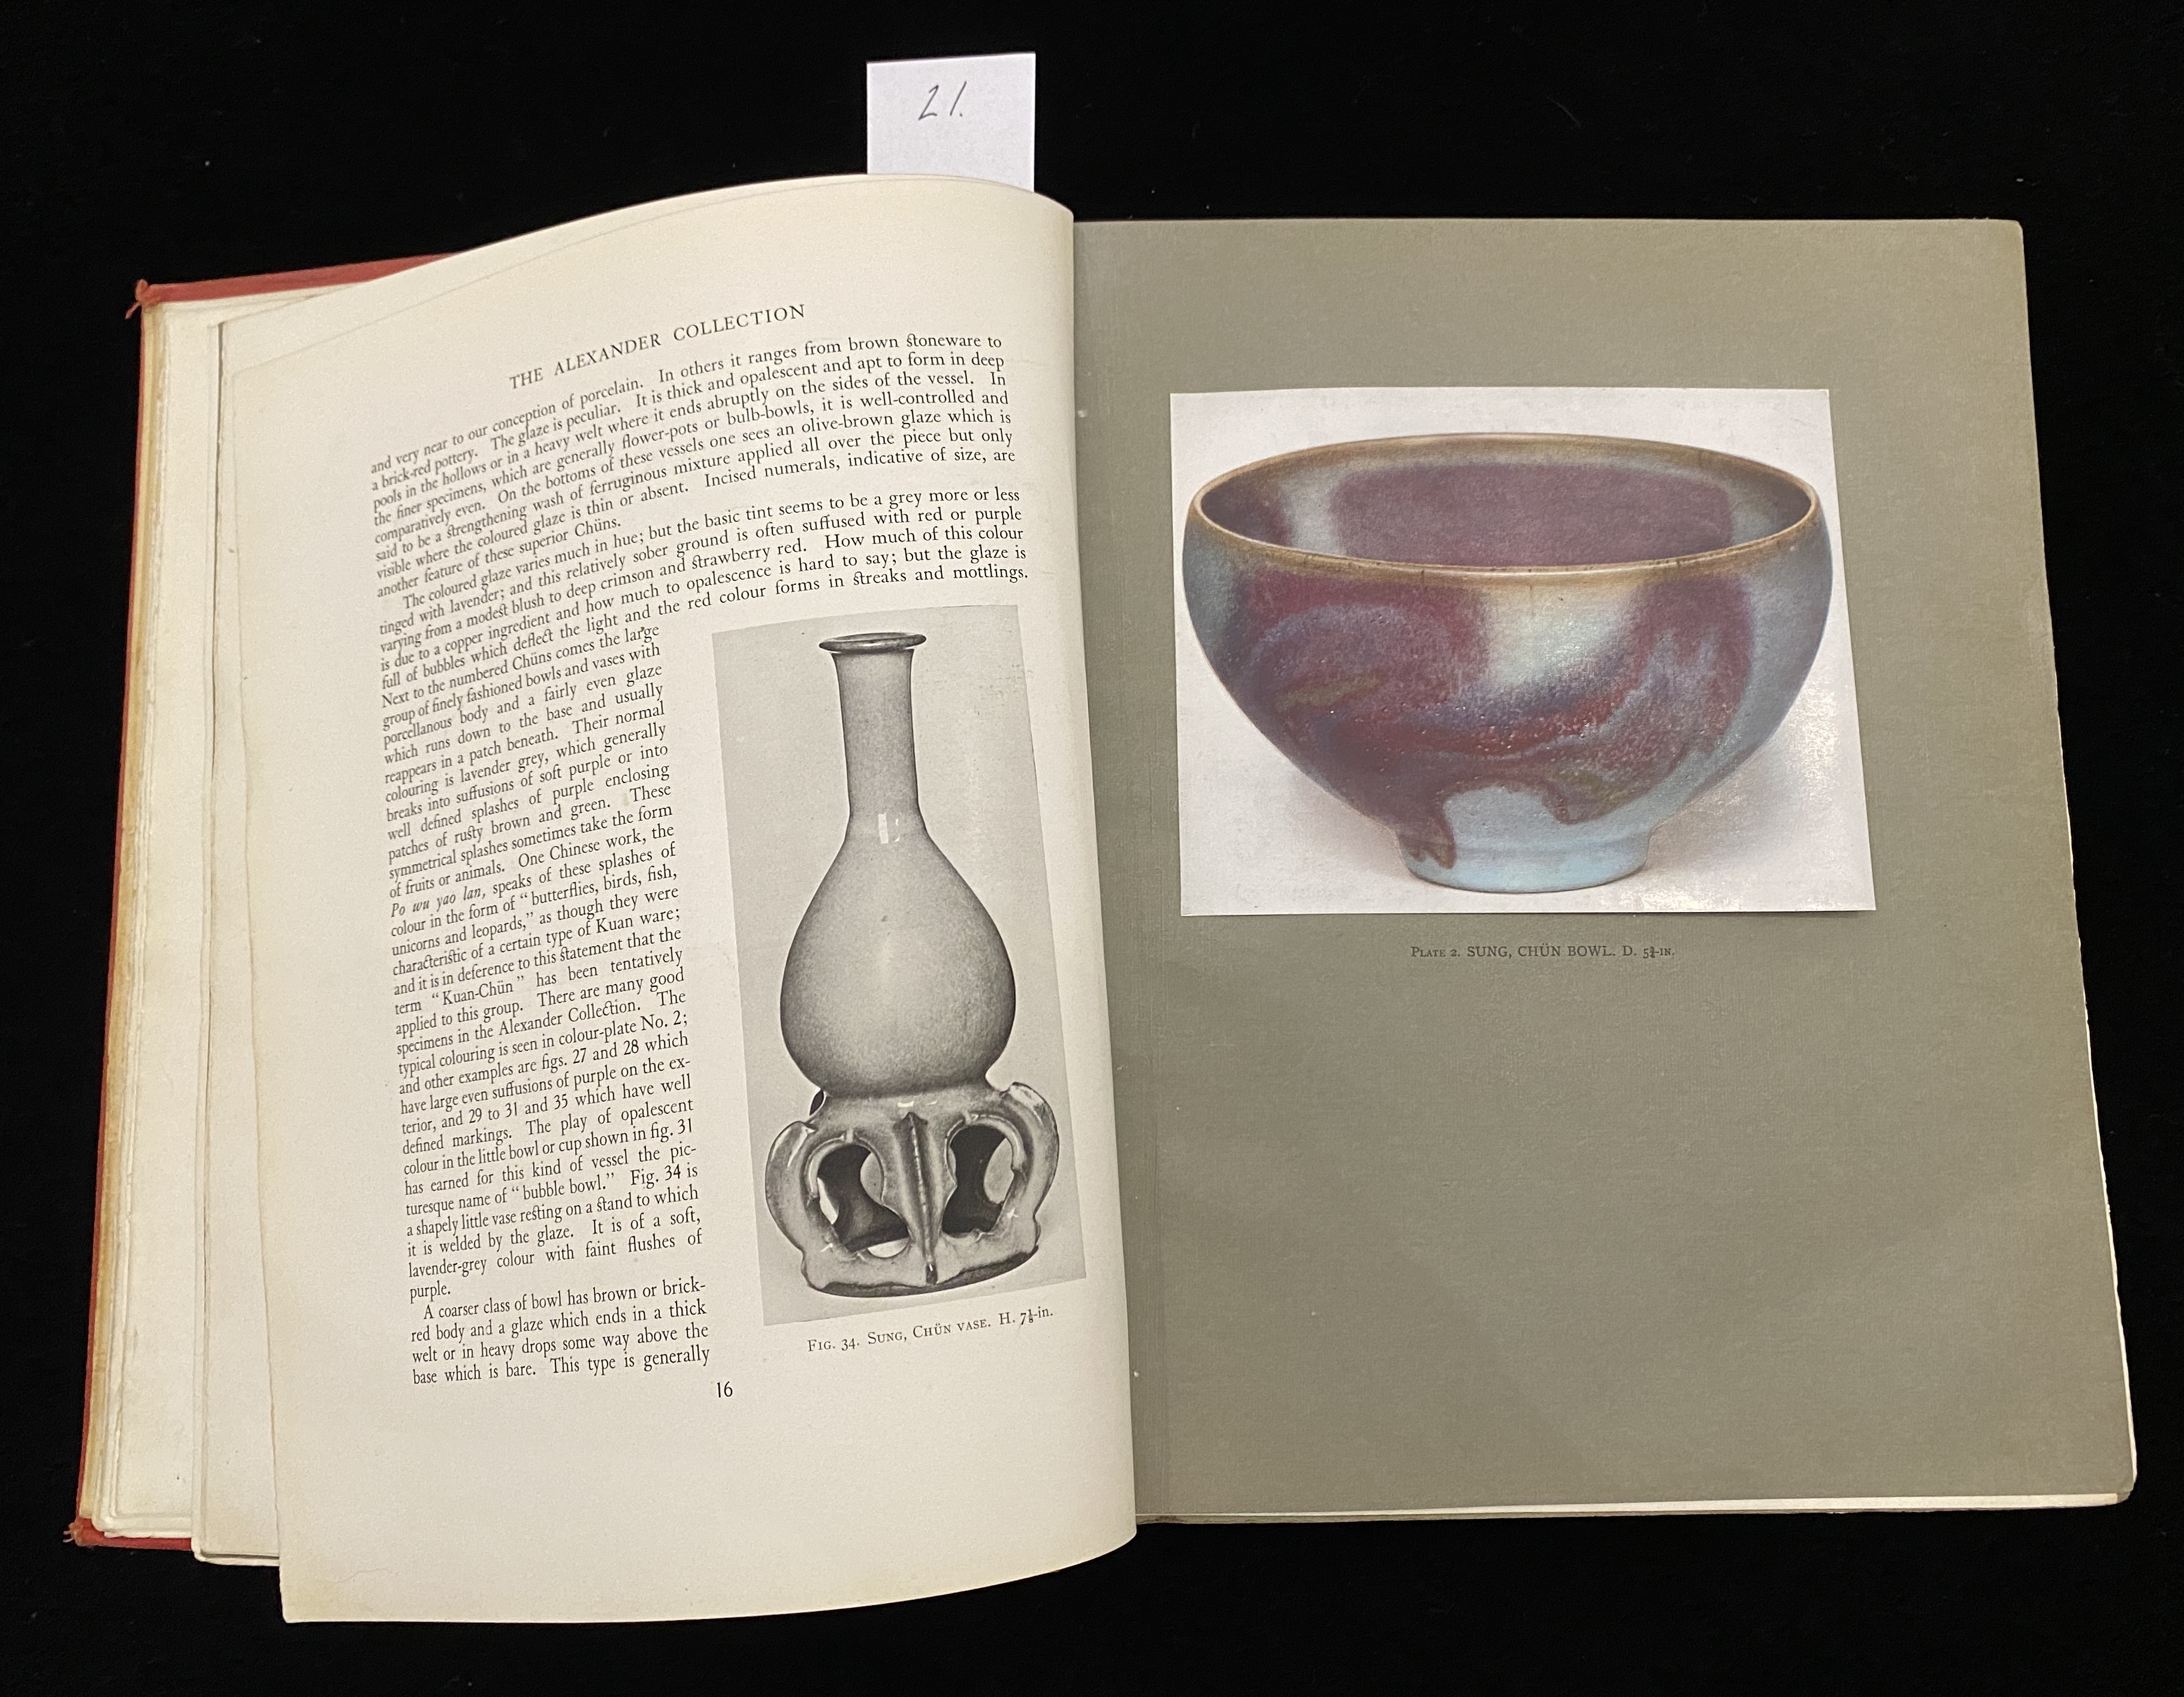 CHINESE CERAMICS IN PRIVATE COLLECTIONS R. L. HOBSON B. RACKHAM W. KING HALT0N & TRUSCOTT SMITH 1931 - Image 6 of 10